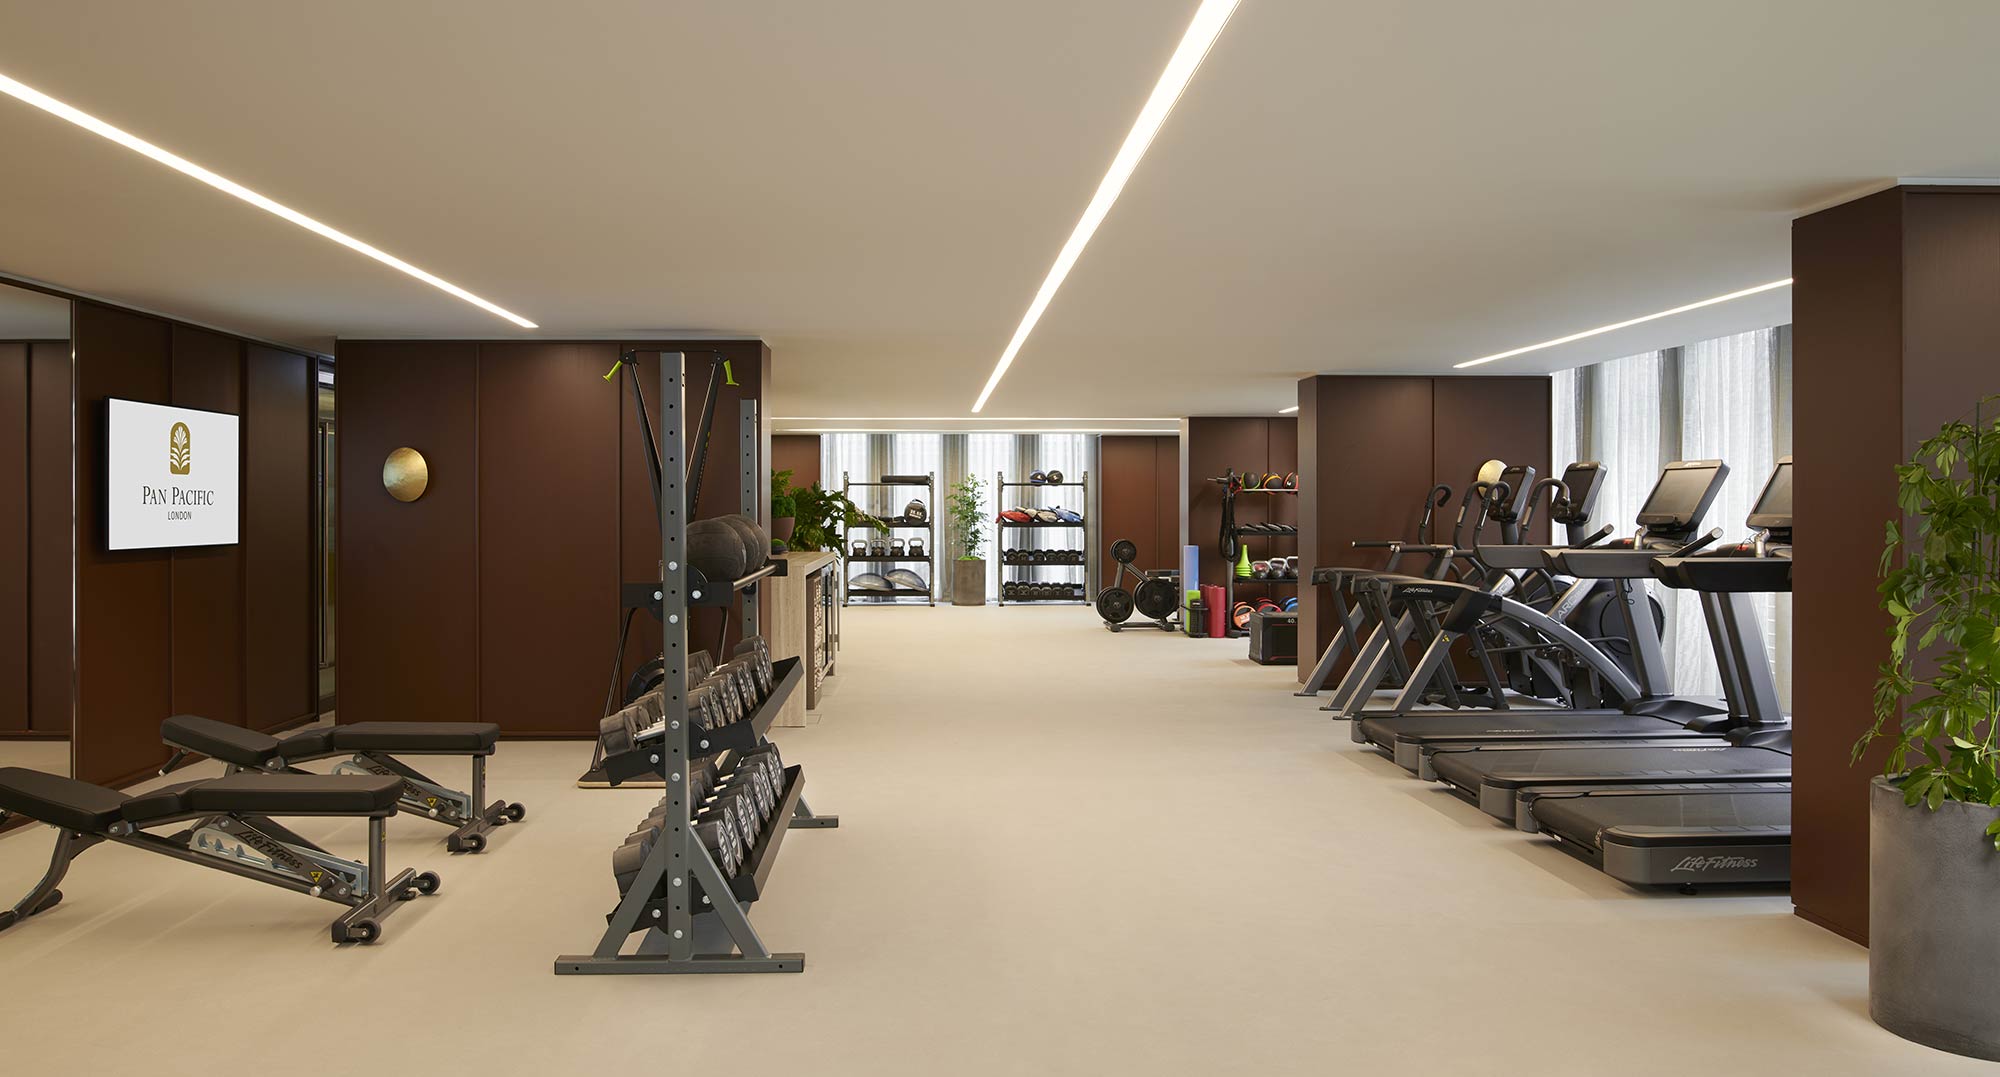 Gym located in Pan Pacific London